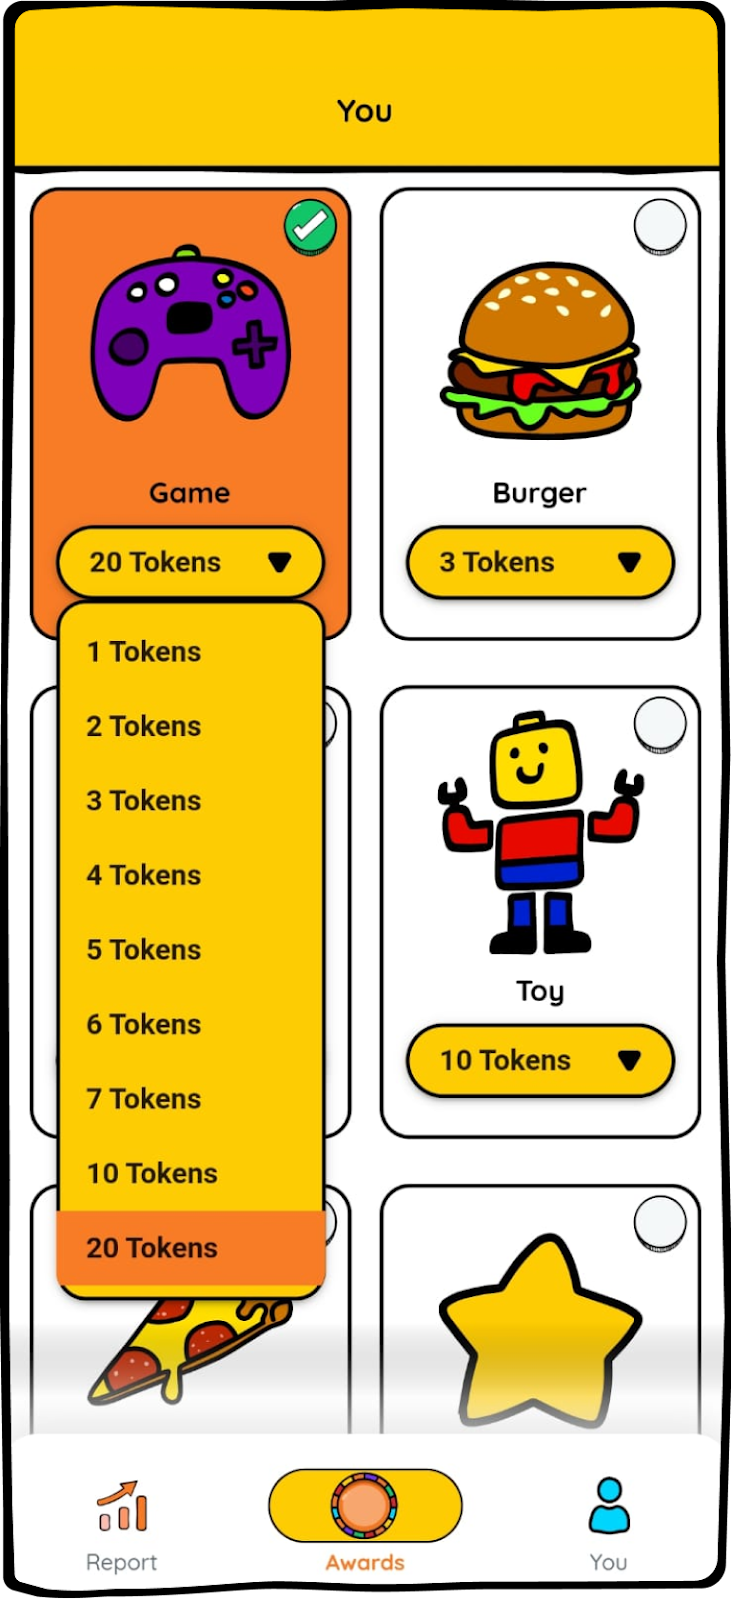 Determine the number of tokens